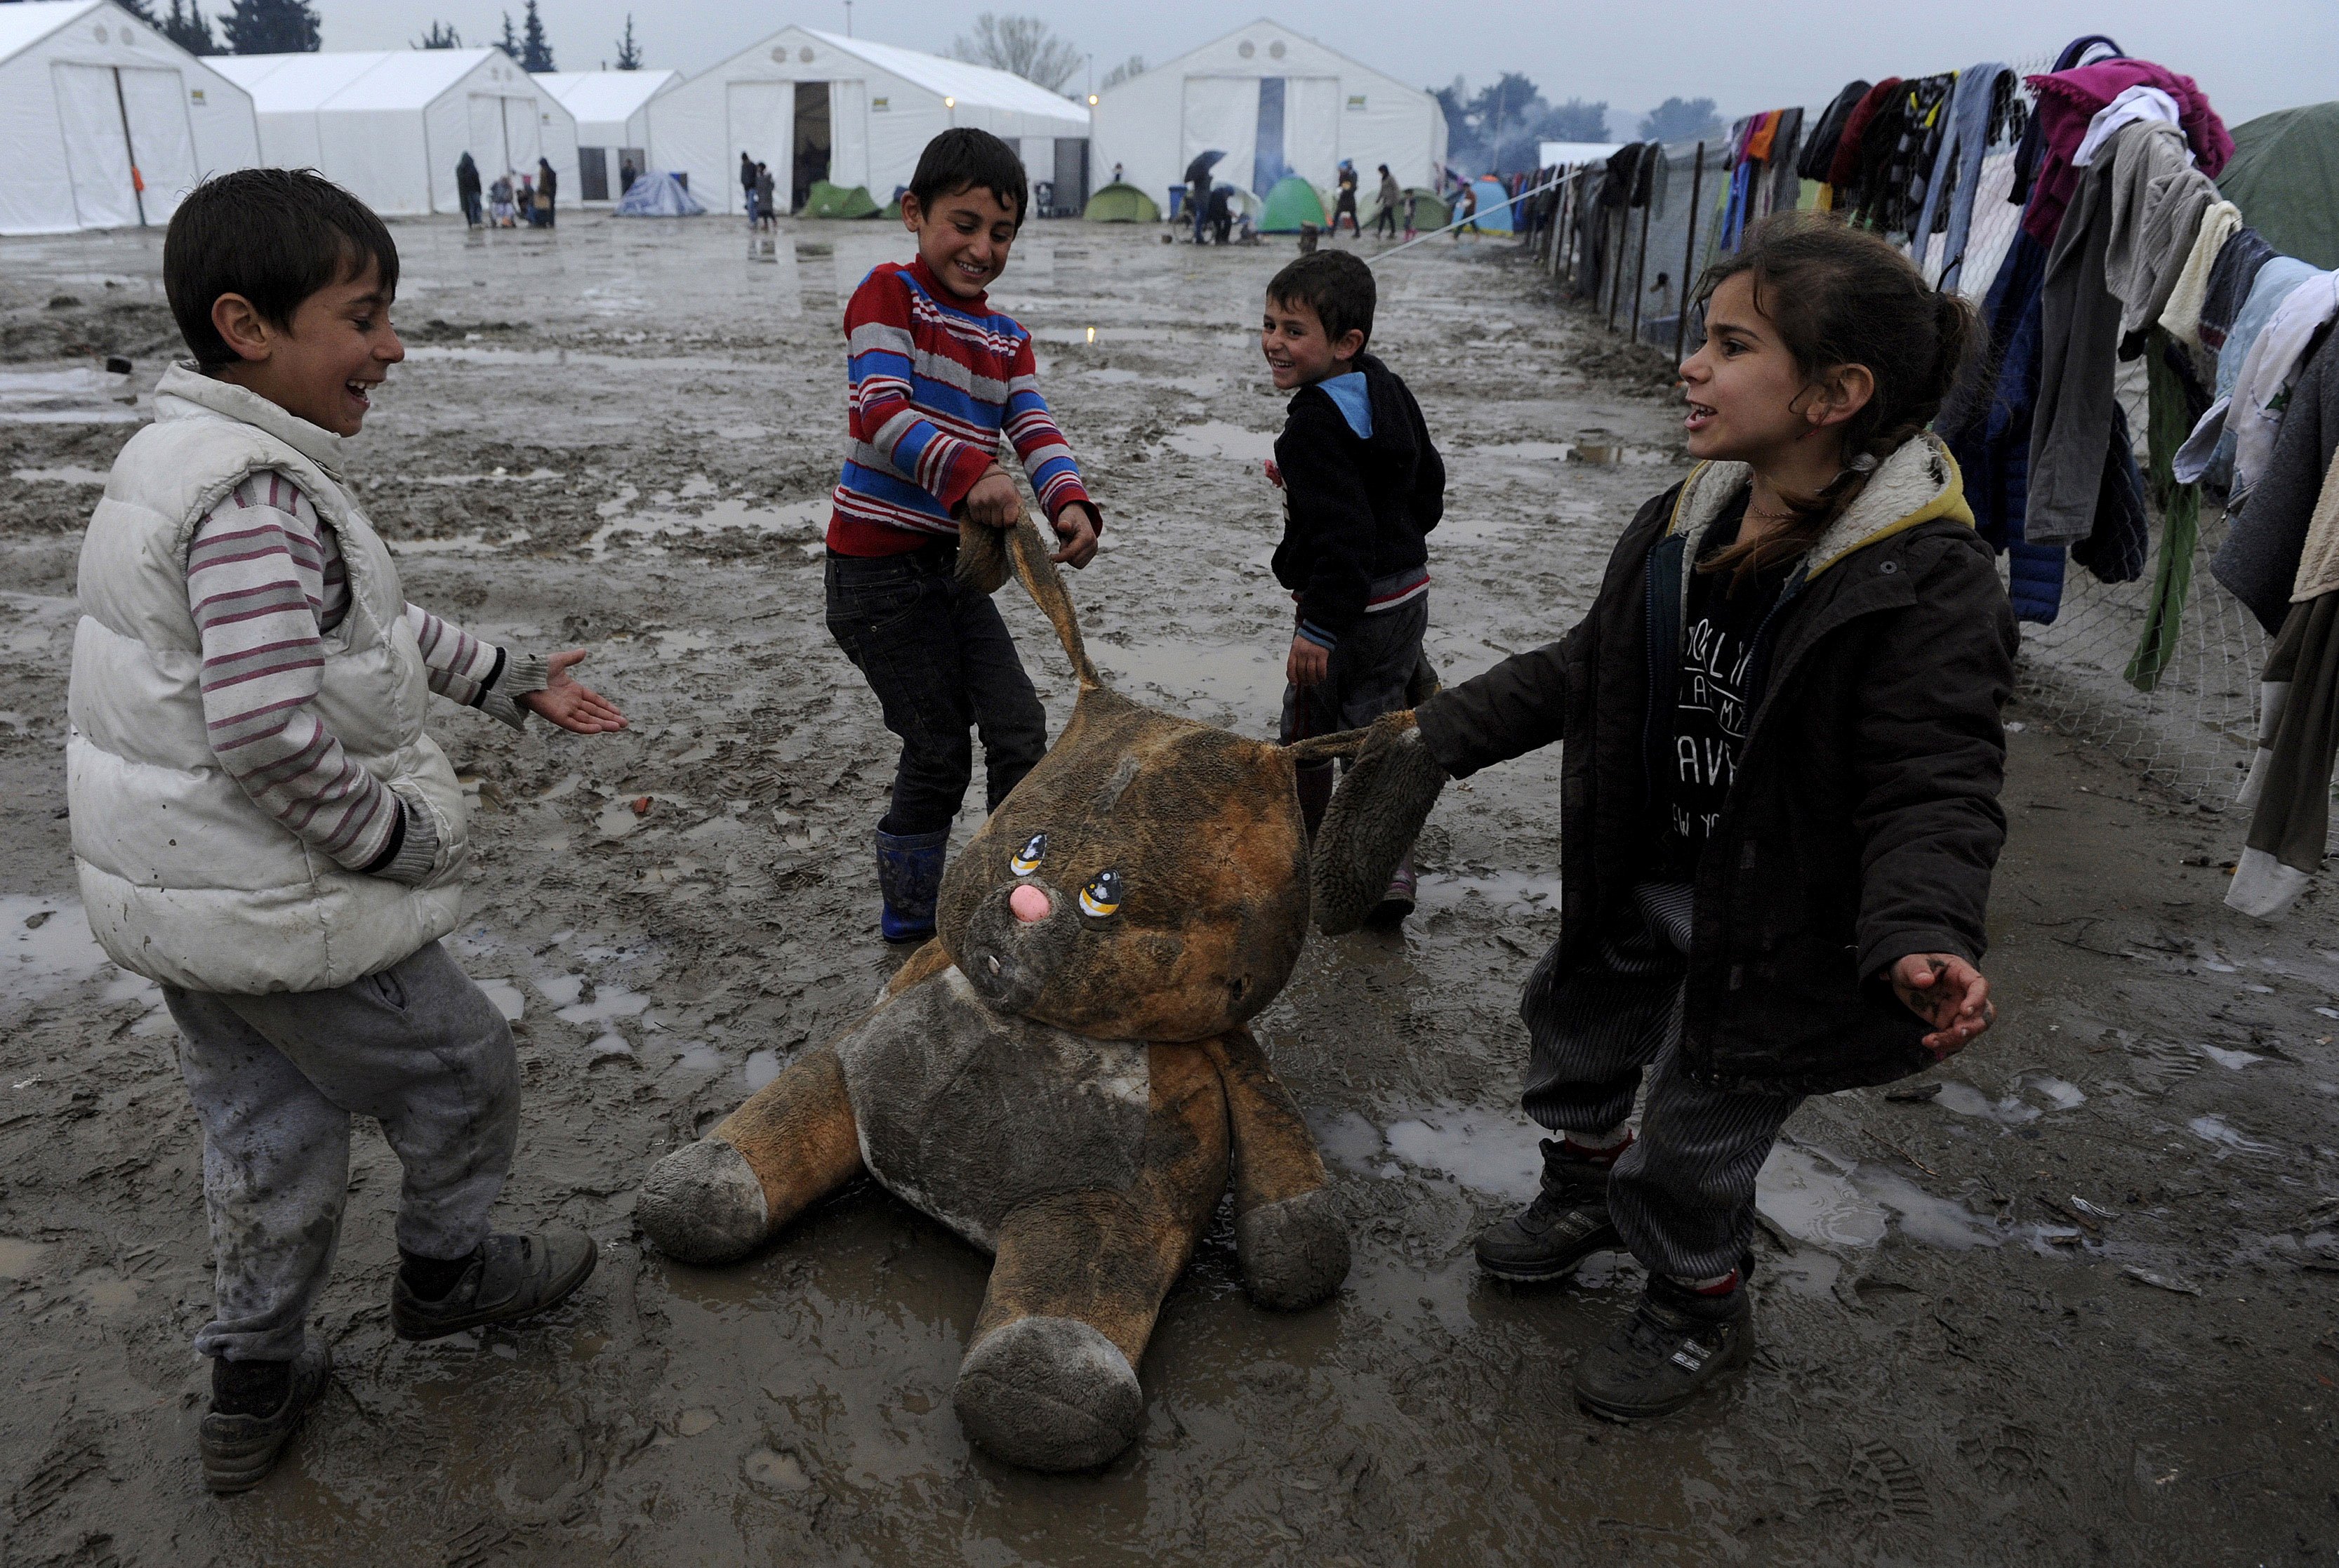 Refugee children play with a stuffed toy at a muddy makeshift camp at the Greek-Macedonian border, near the village of Idomeni, Greece March 15, 2016. REUTERS/Alexandros Avramidis